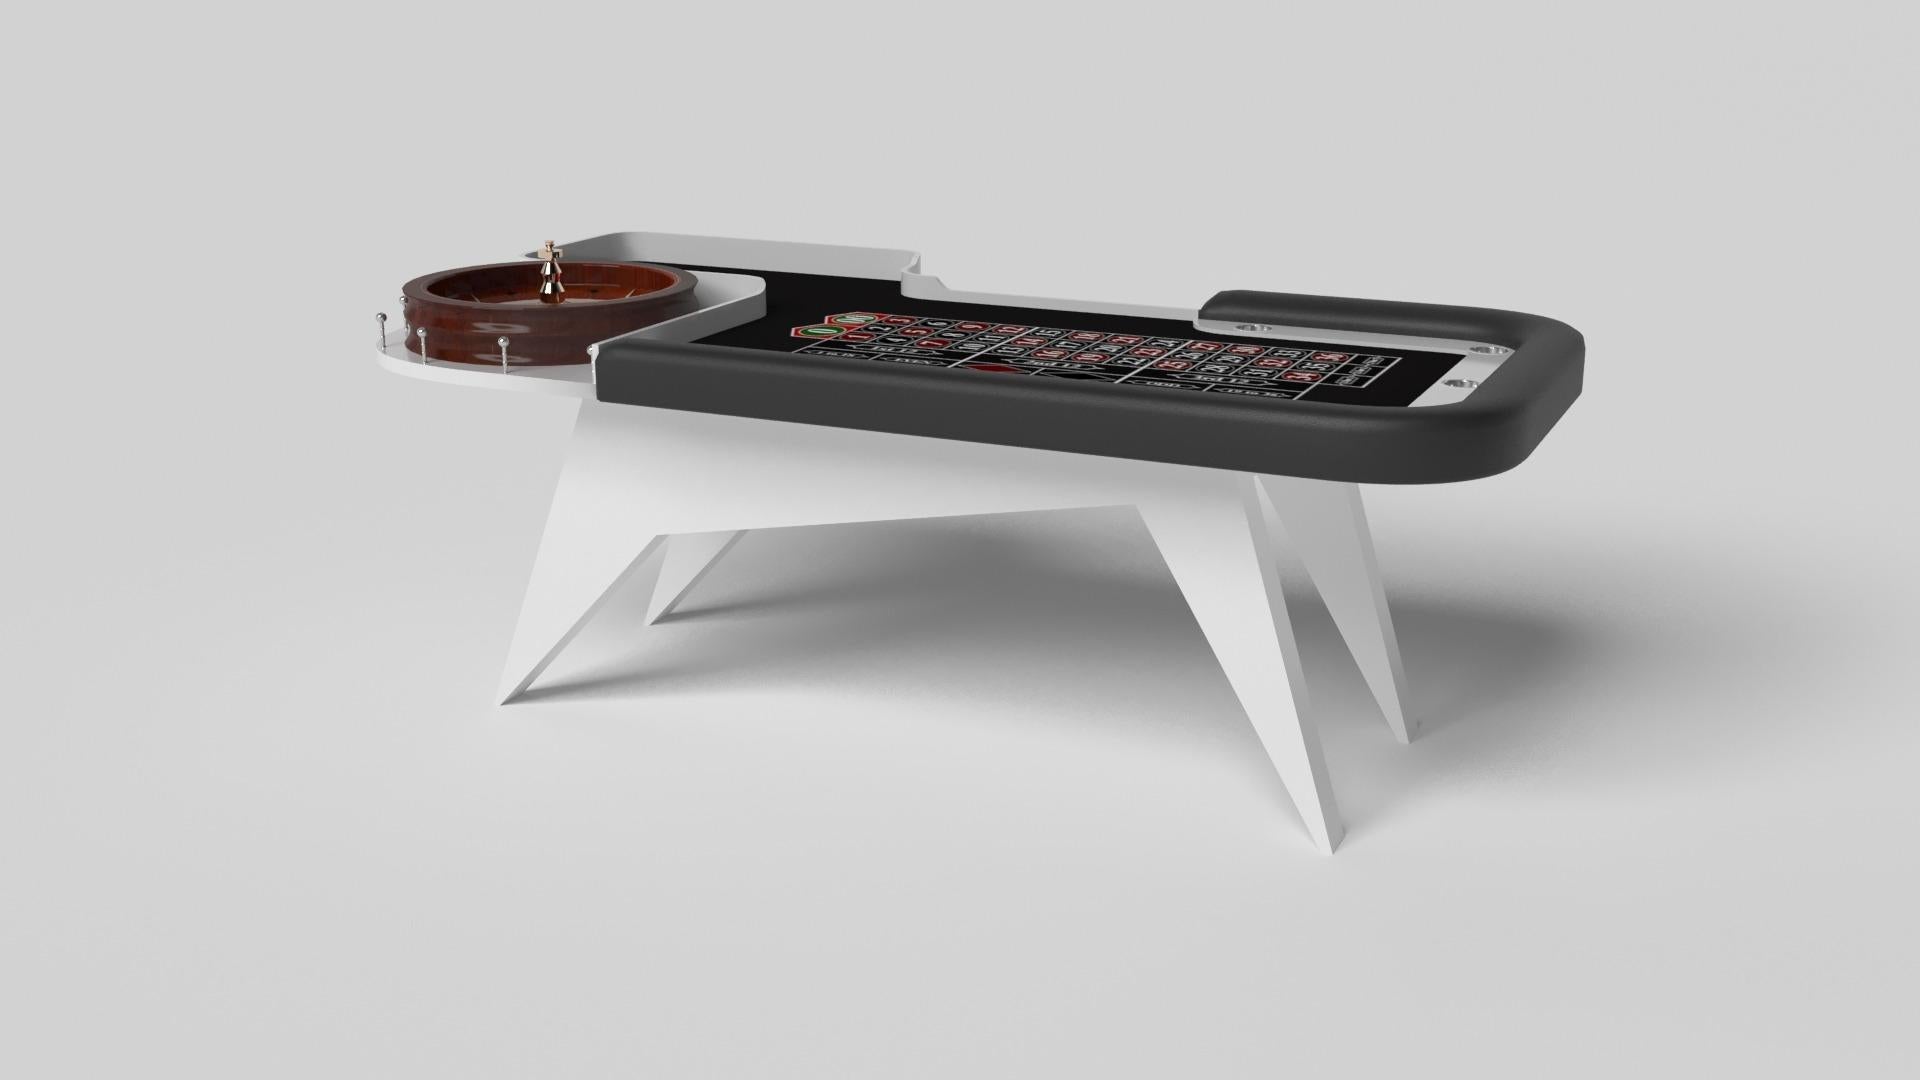 Simple yet sophisticated, the Mantis roulette table puts a fresh, modern spin on a classic four-legged design. Sharp angles and tapered legs provide sleek stability.

Size:

98”X50”X30”
Custom Sizes Available Per Request